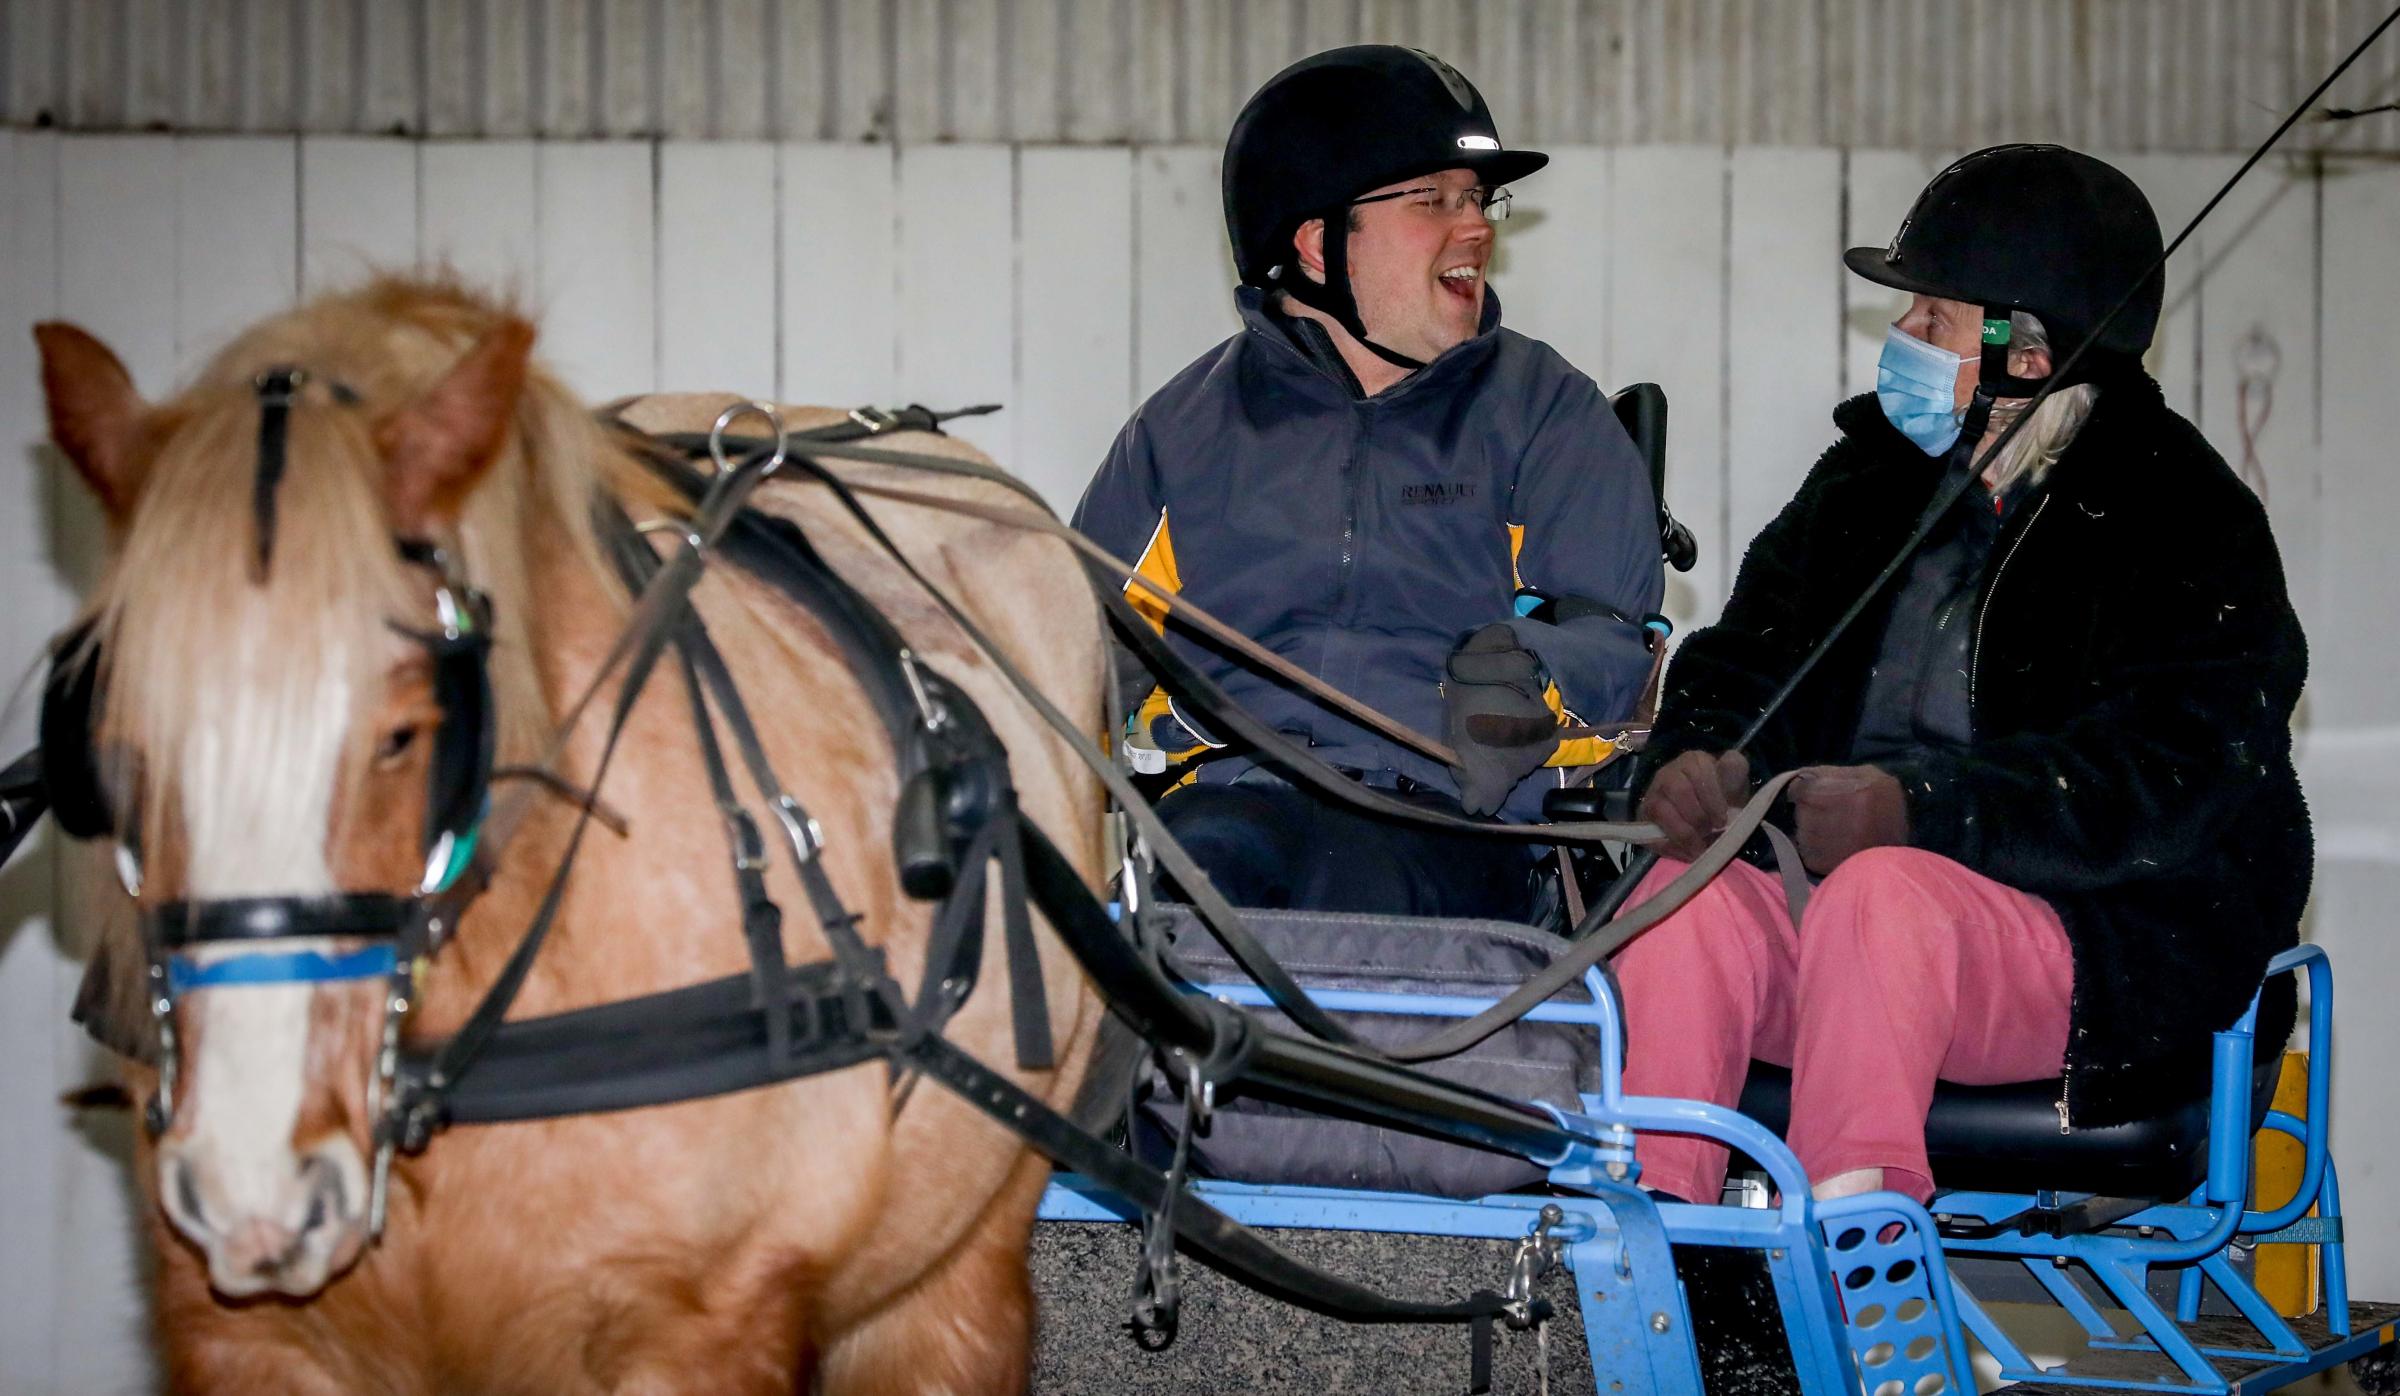 Matt with his coach Ann Connolly and Mack the horse honing his carriage riding skills.